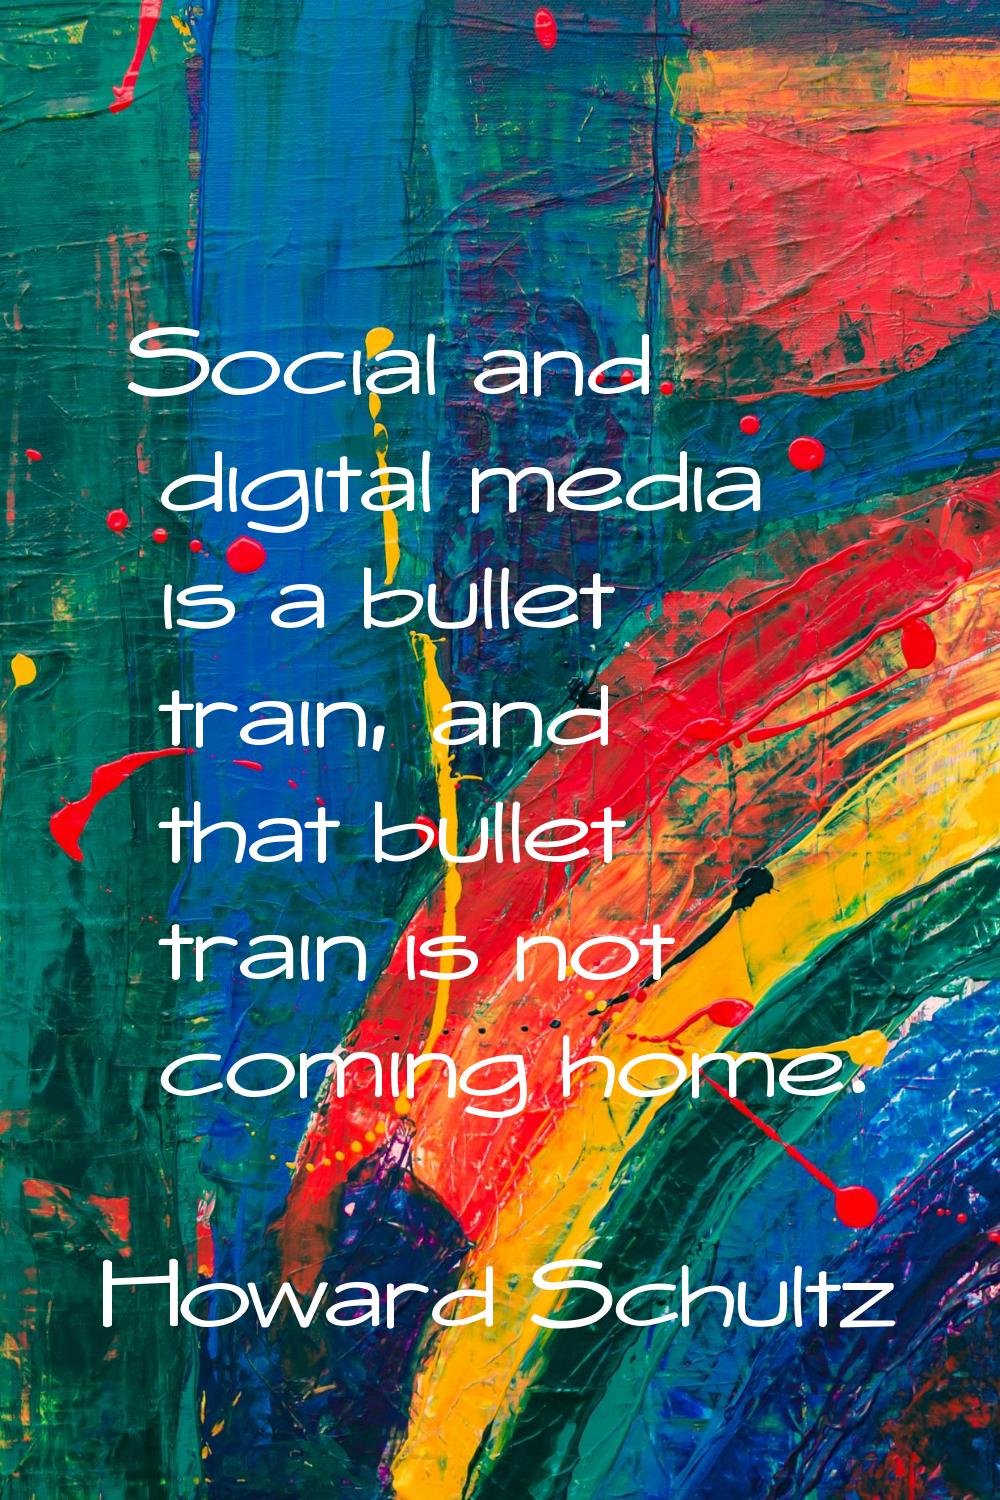 Social and digital media is a bullet train, and that bullet train is not coming home.